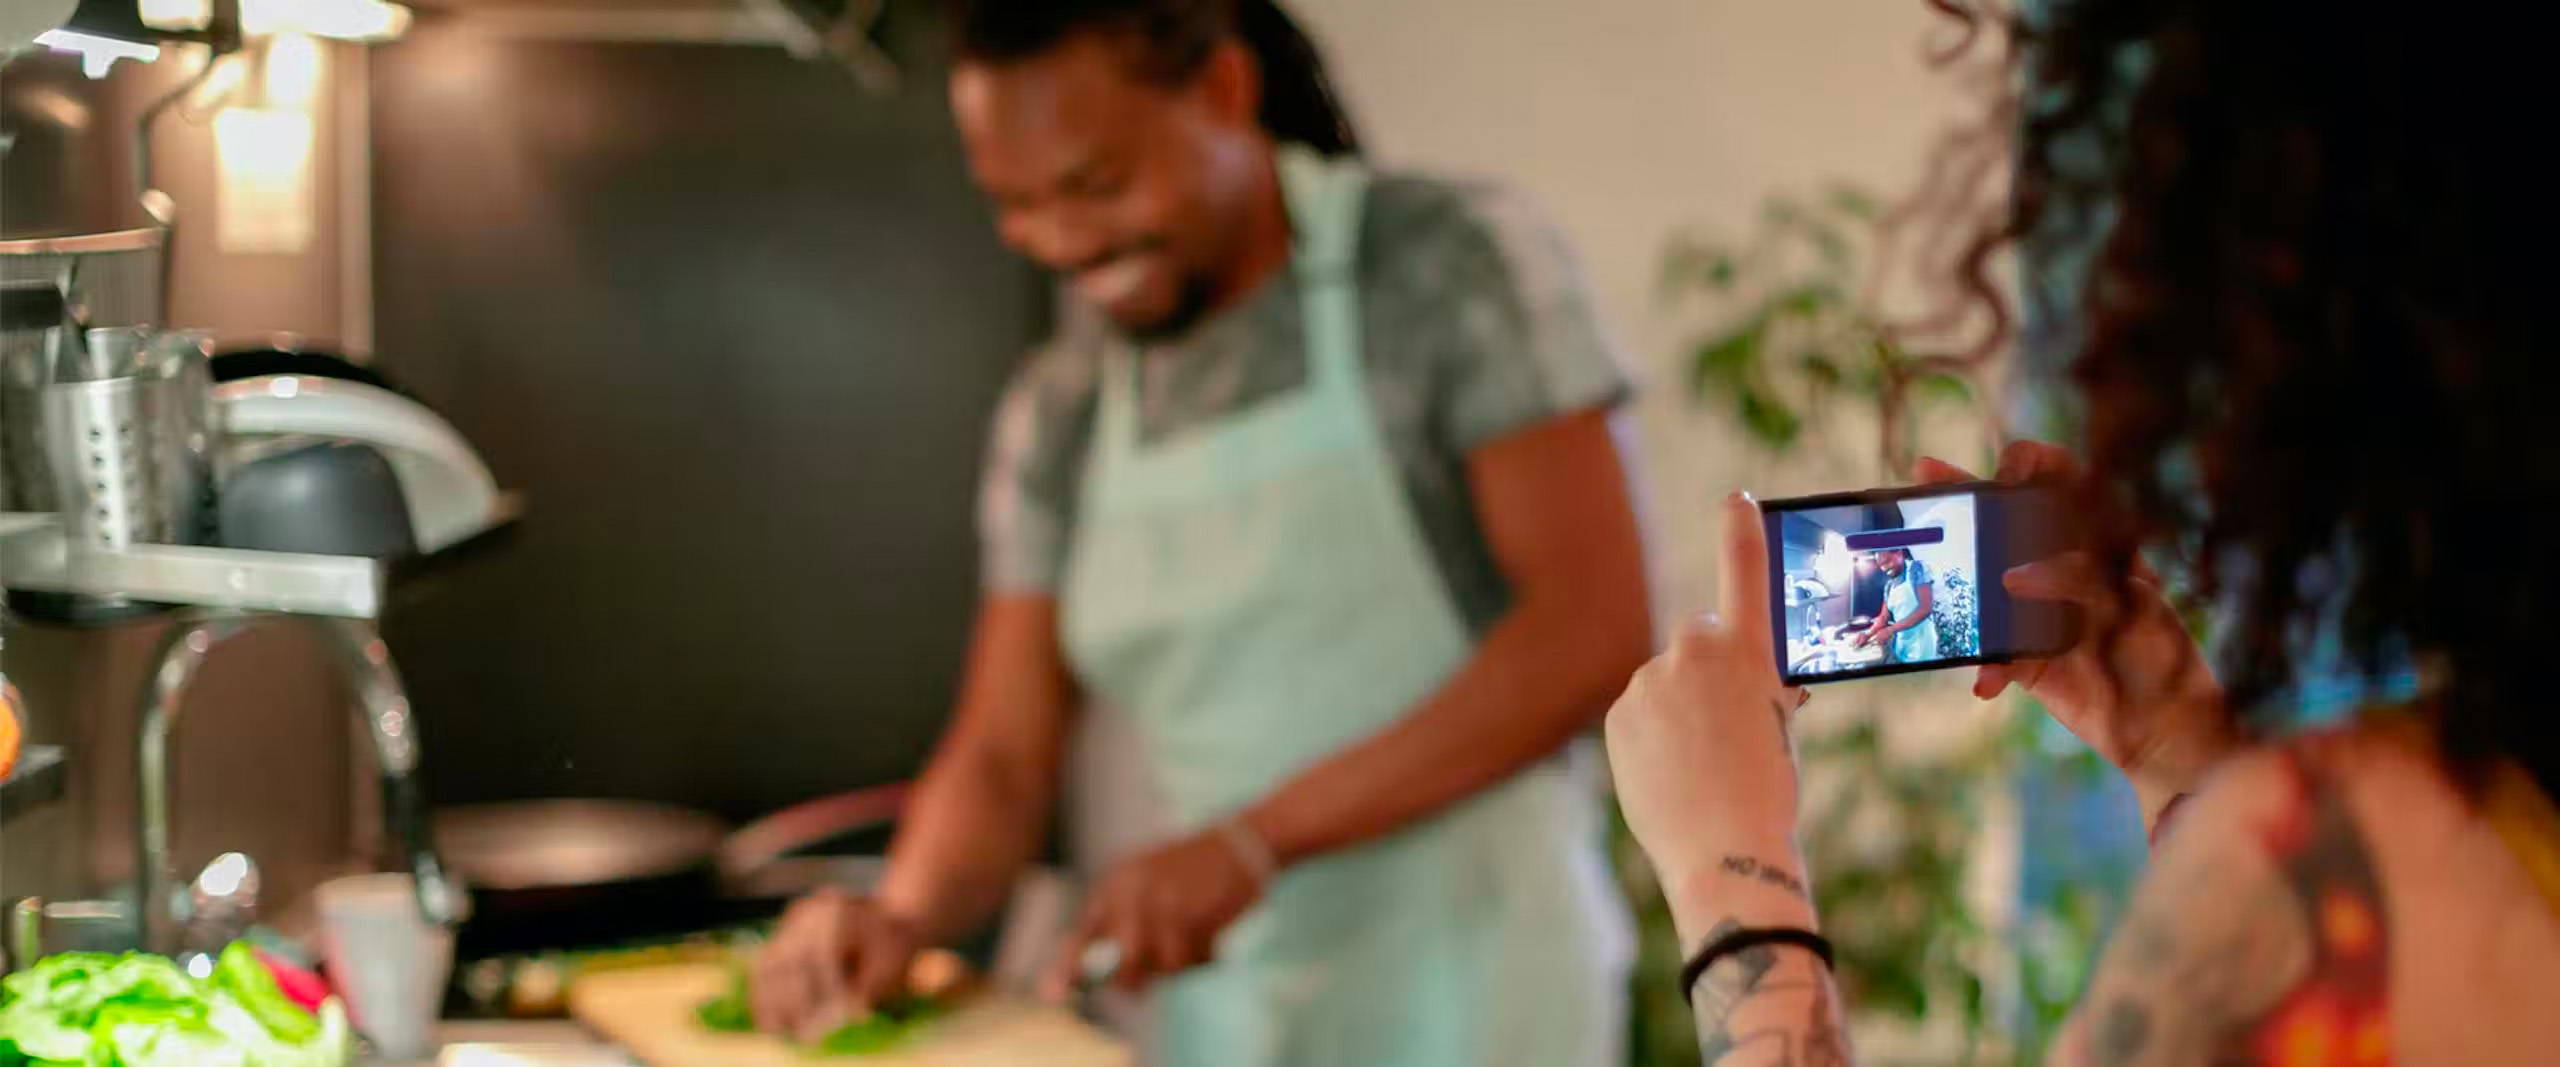 Woman in foreground taking video with her phone of a man, in the background, preparing a meal.